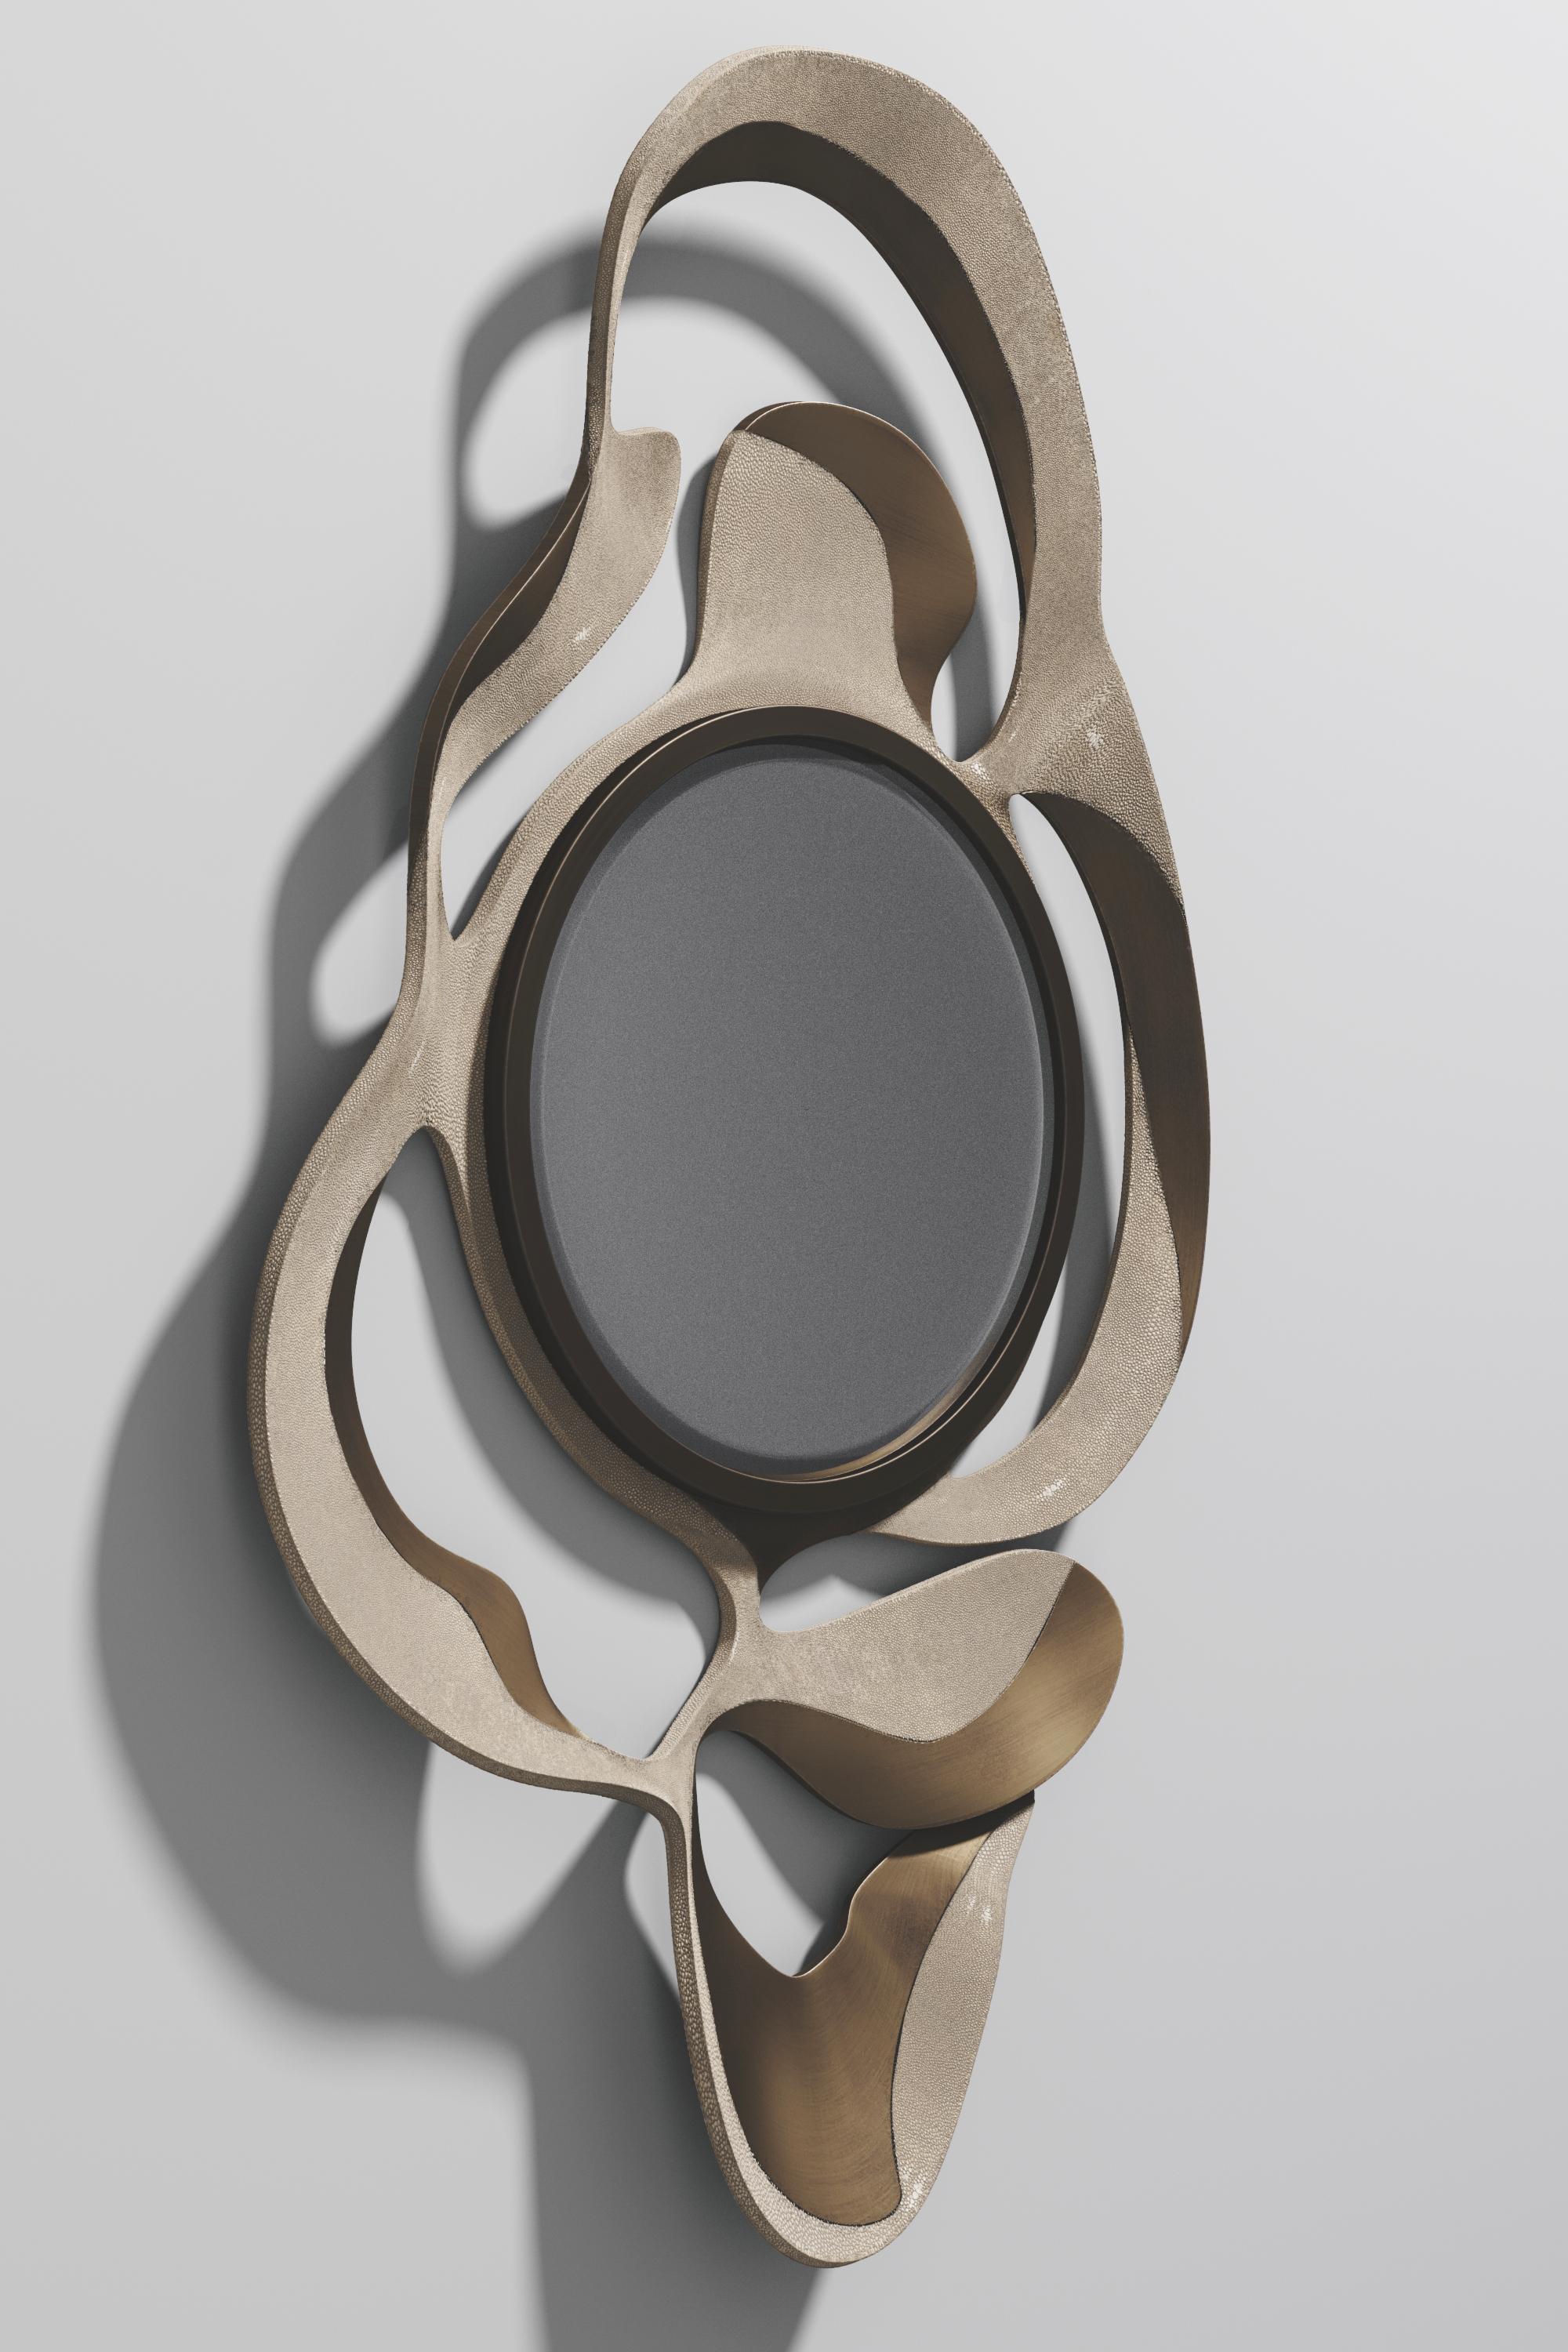 The Leaf Mirror by Kifu Paris is a dramatic and organic piece. The cream shagreen and bronze-patina bass inlay mixture creates a striking appearance as it emulates a whimsical interpretation of intertwining branches. This piece is designed by Kifu